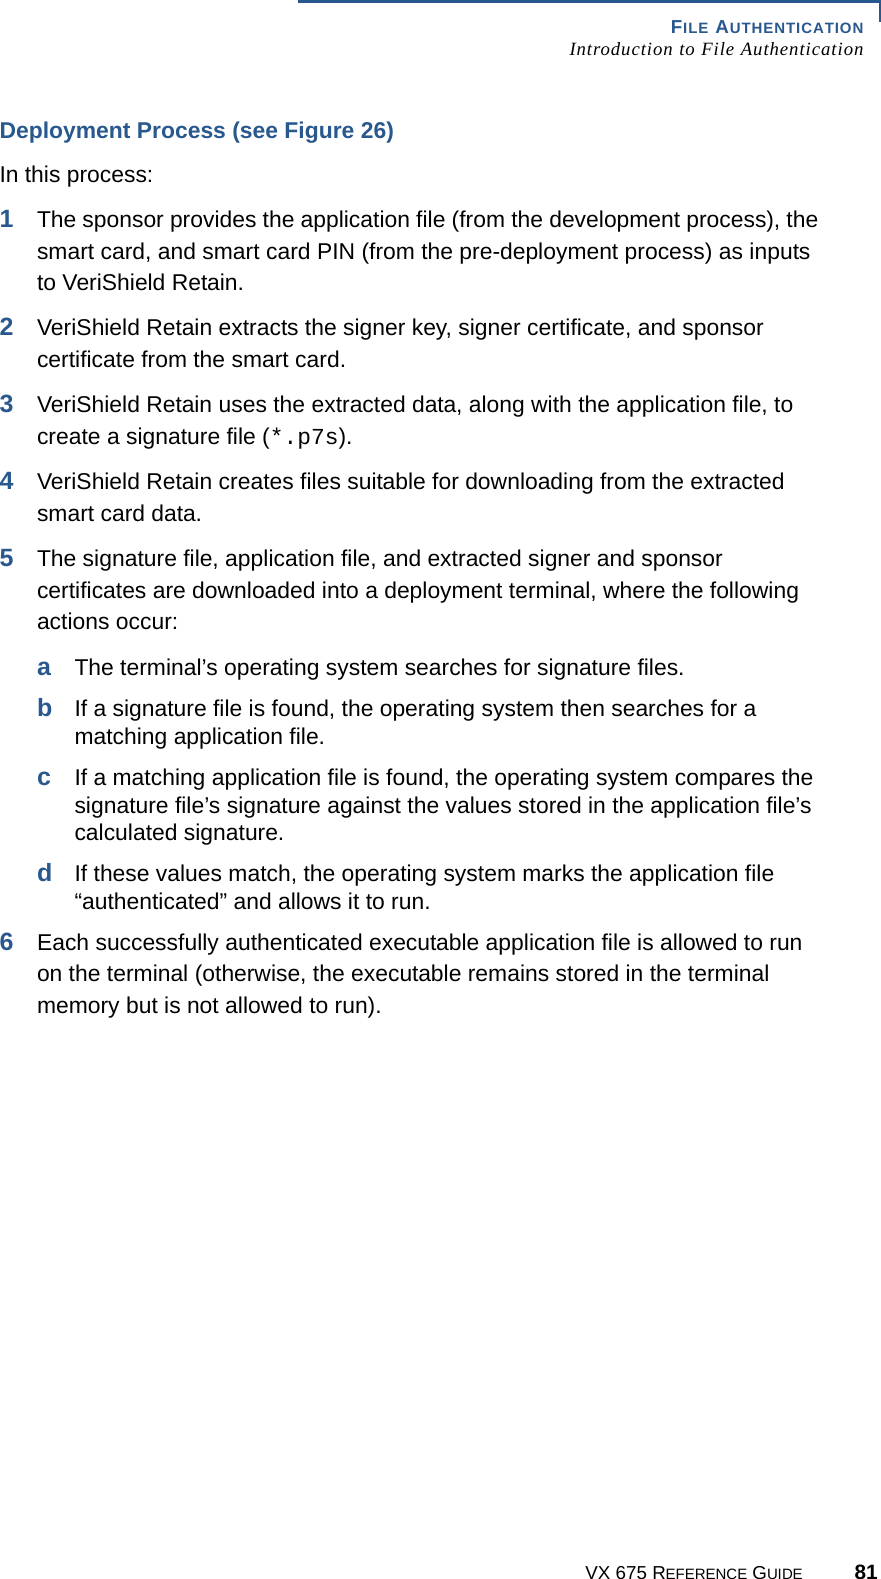 FILE AUTHENTICATIONIntroduction to File AuthenticationVX 675 REFERENCE GUIDE 81Deployment Process (see Figure 26)In this process:1The sponsor provides the application file (from the development process), the smart card, and smart card PIN (from the pre-deployment process) as inputs to VeriShield Retain.2VeriShield Retain extracts the signer key, signer certificate, and sponsor certificate from the smart card.3VeriShield Retain uses the extracted data, along with the application file, to create a signature file (*.p7s).4VeriShield Retain creates files suitable for downloading from the extracted smart card data.5The signature file, application file, and extracted signer and sponsor certificates are downloaded into a deployment terminal, where the following actions occur:aThe terminal’s operating system searches for signature files.bIf a signature file is found, the operating system then searches for a matching application file.cIf a matching application file is found, the operating system compares the signature file’s signature against the values stored in the application file’s calculated signature.dIf these values match, the operating system marks the application file “authenticated” and allows it to run.6Each successfully authenticated executable application file is allowed to run on the terminal (otherwise, the executable remains stored in the terminal memory but is not allowed to run).